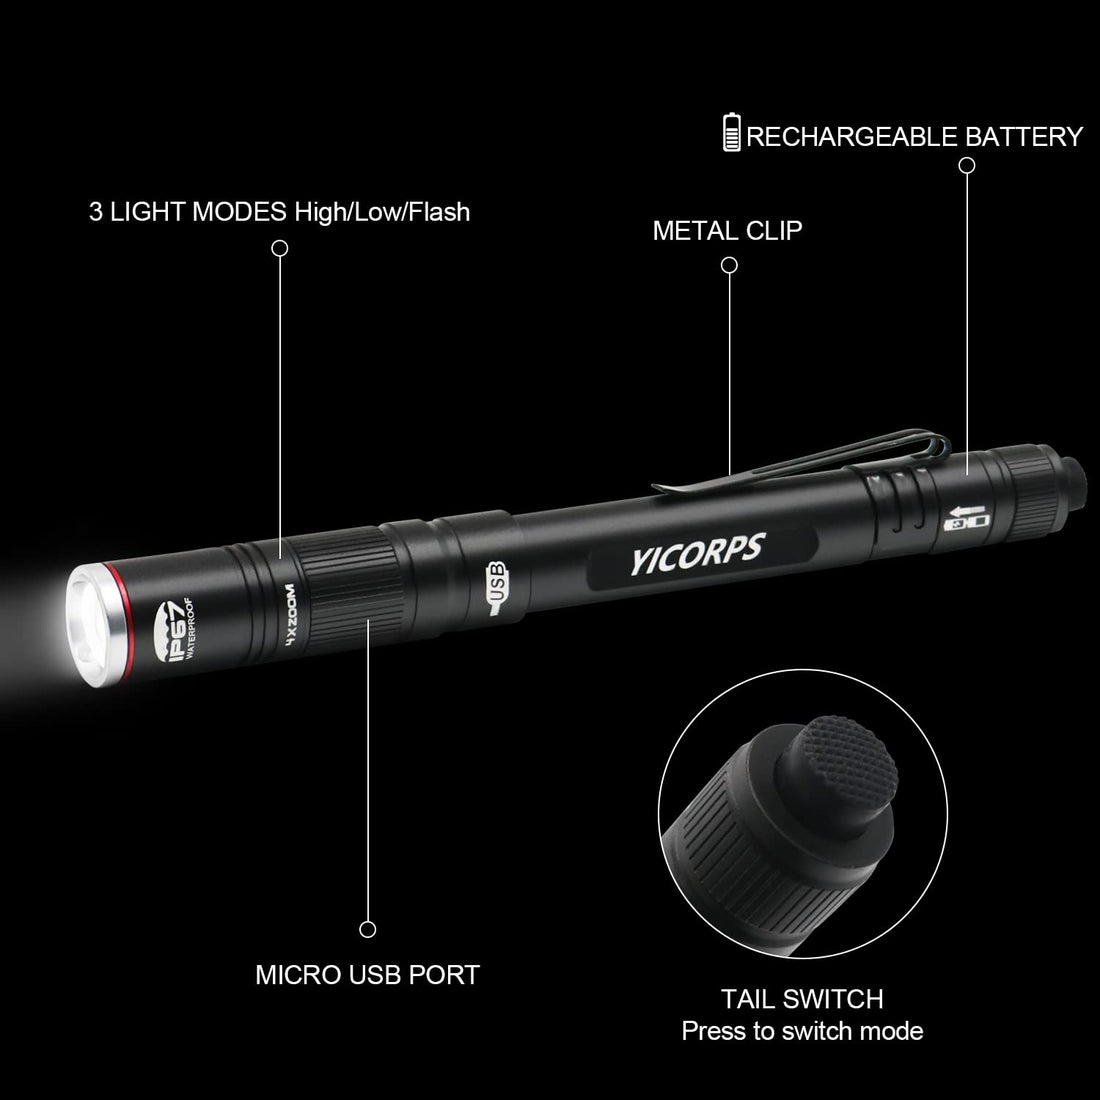 YICORPS Rechargeable Pen Light Flashlight 300 Lumens 3 Lighting Modes Handheld Pocket Small Flashlights with Clip, Zoomable Waterproof Perfect for Emergency, Inspection, Repair, Camping